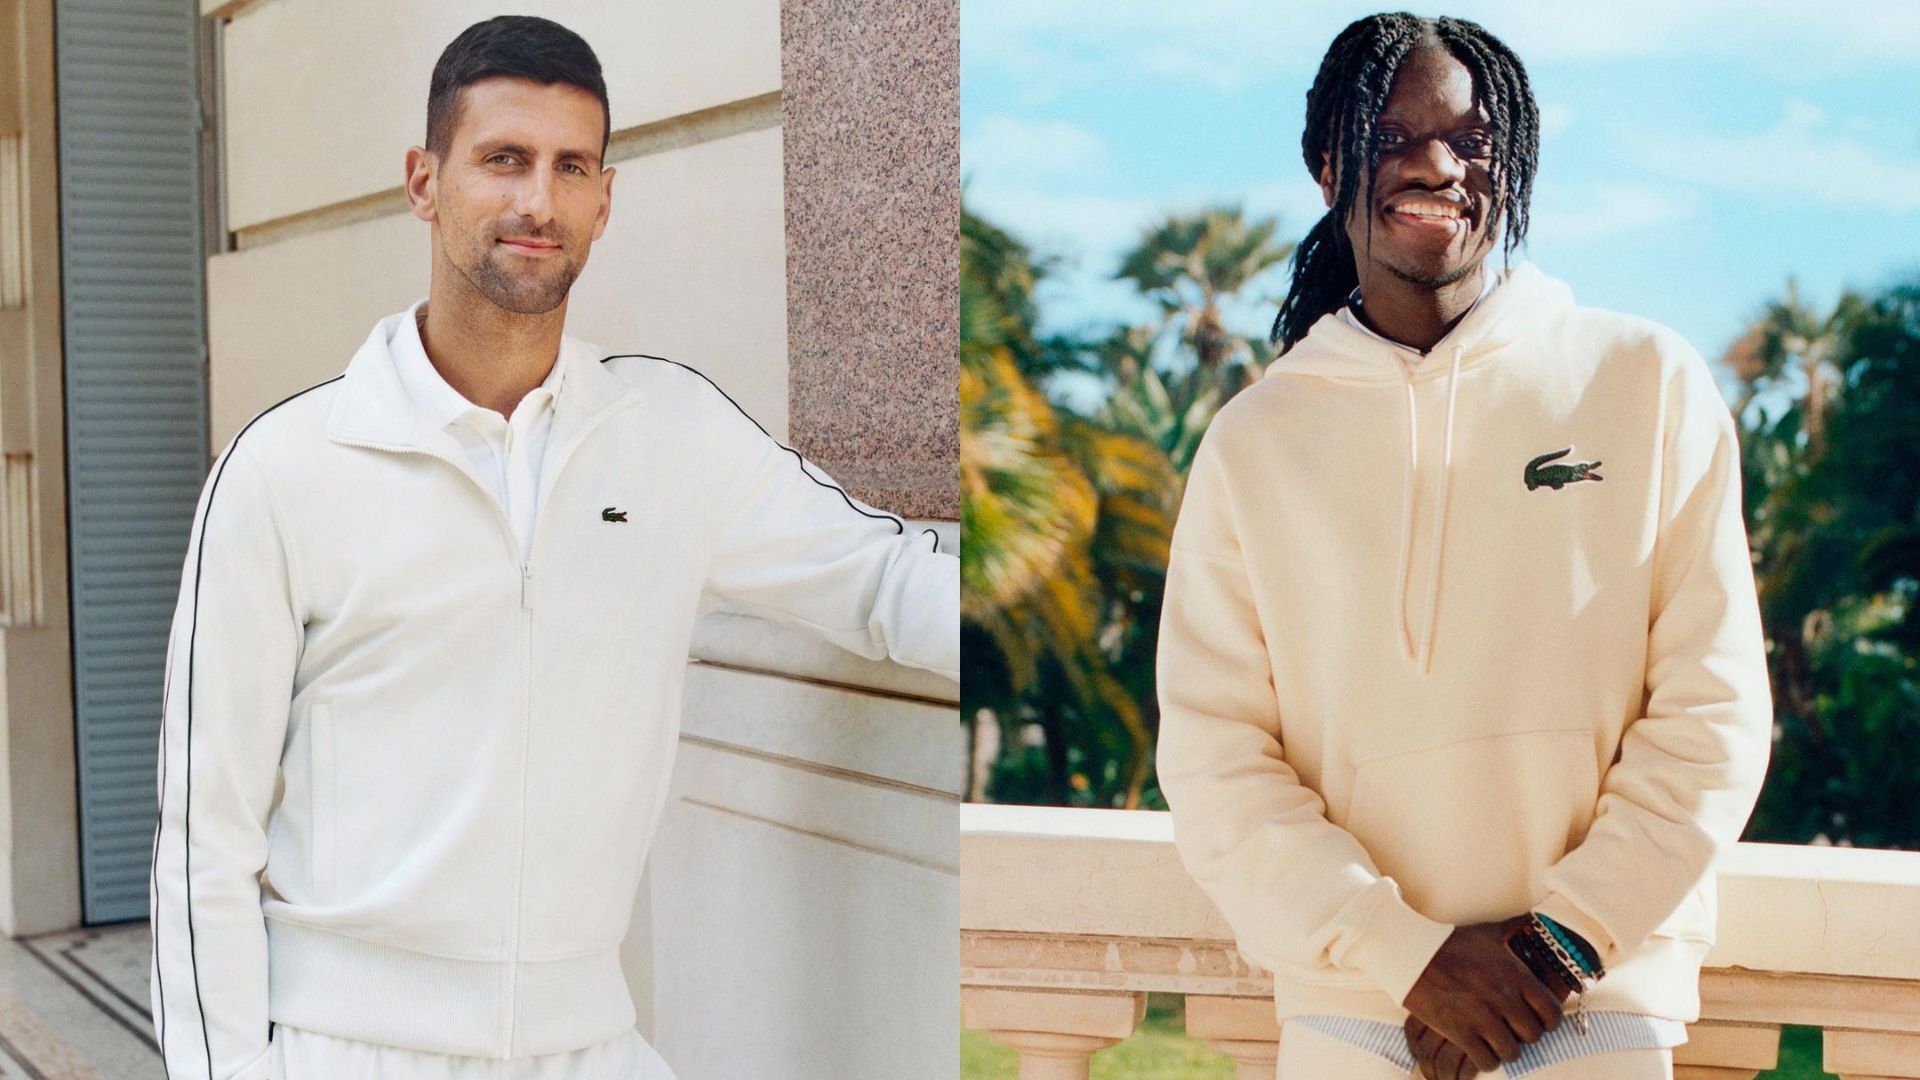 Lacoste Introduces Tracksuit Collection Featuring Novak Djokovic